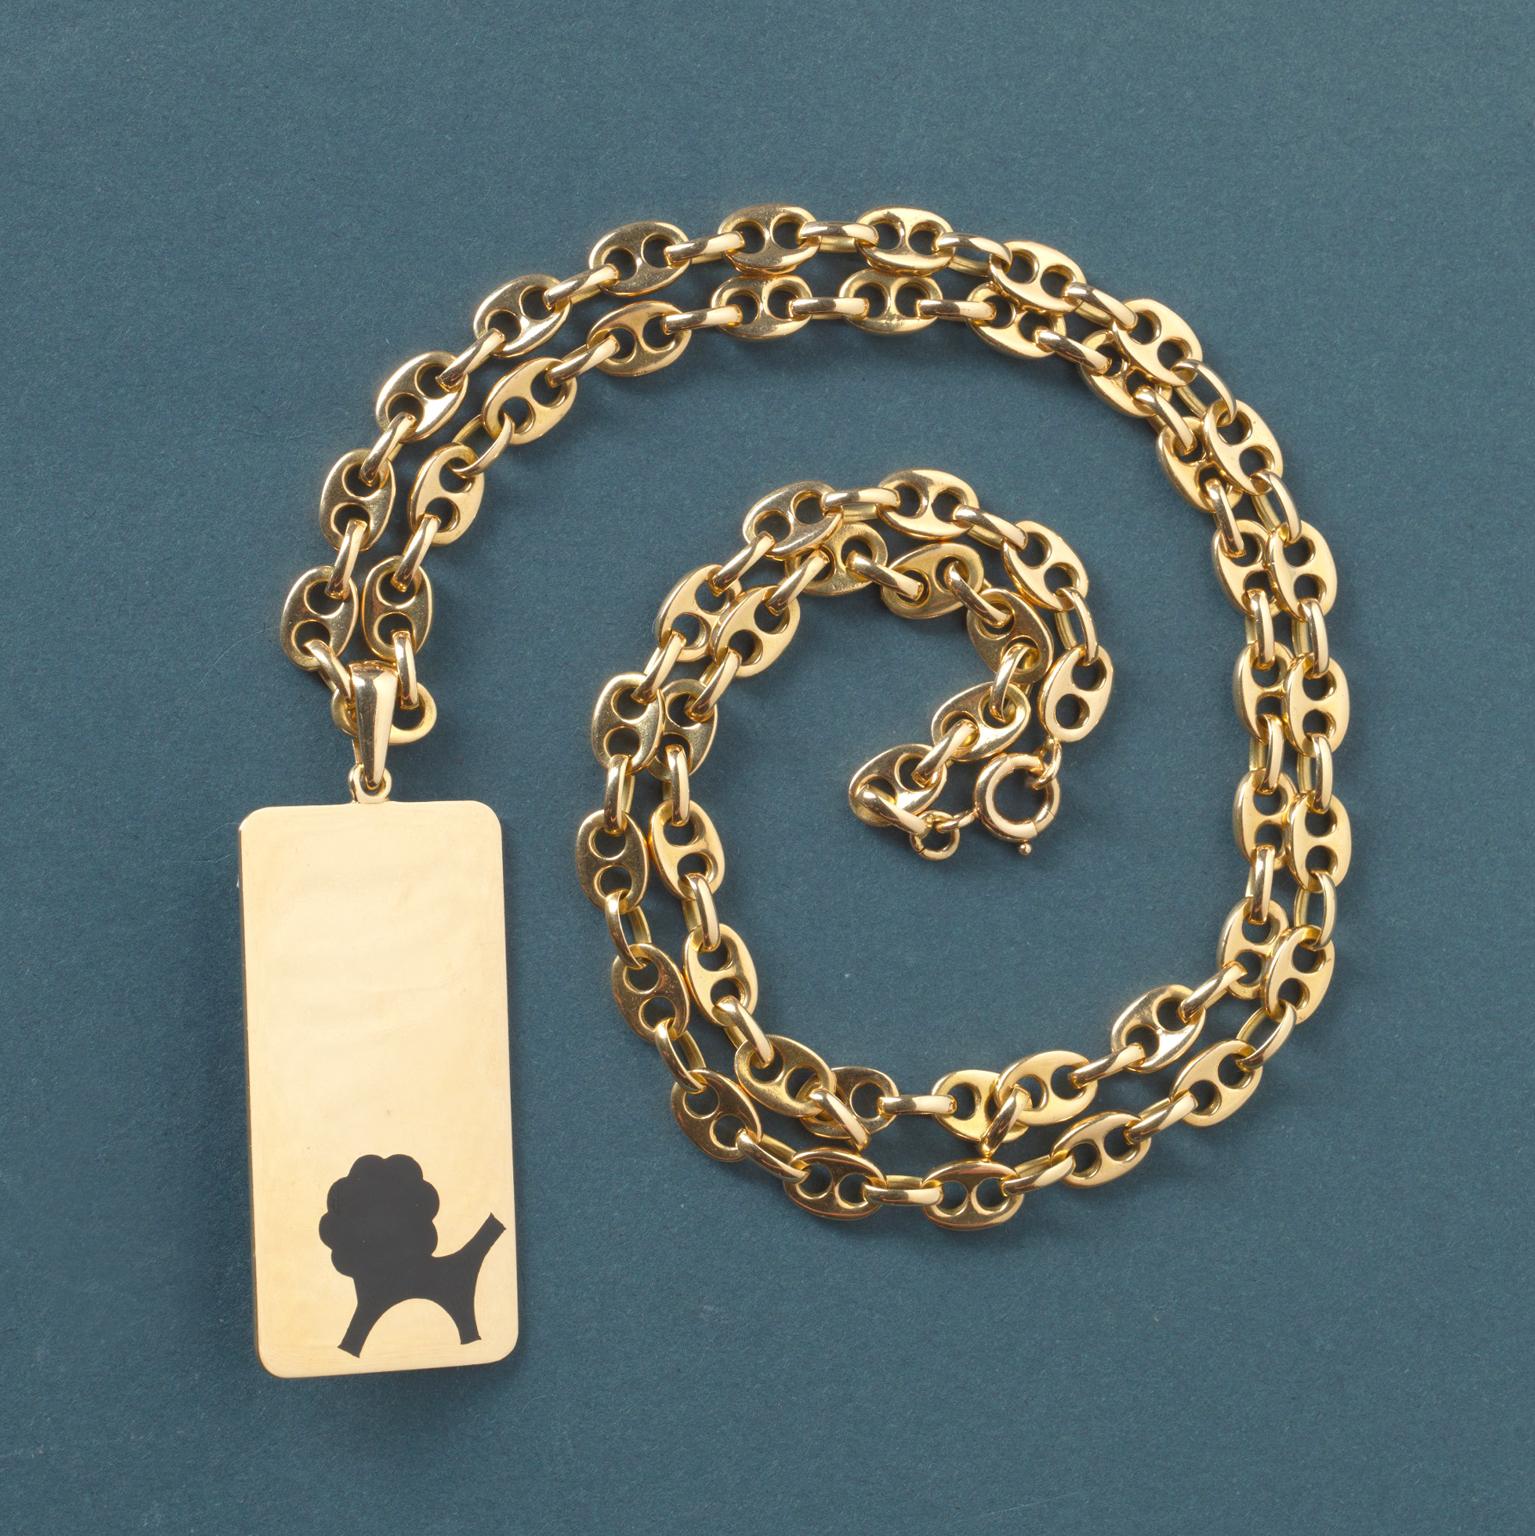 A vintage 18 carat gold chain signed and numbered: Boucheron, Paris, 8287 and an 18 carat gold rectangular pendant with a black enamel leo, signed and numbered: Boucheron, Paris, 57968, circa 1970.

weight: 75 gram
length chain: 70 cm
dimensions